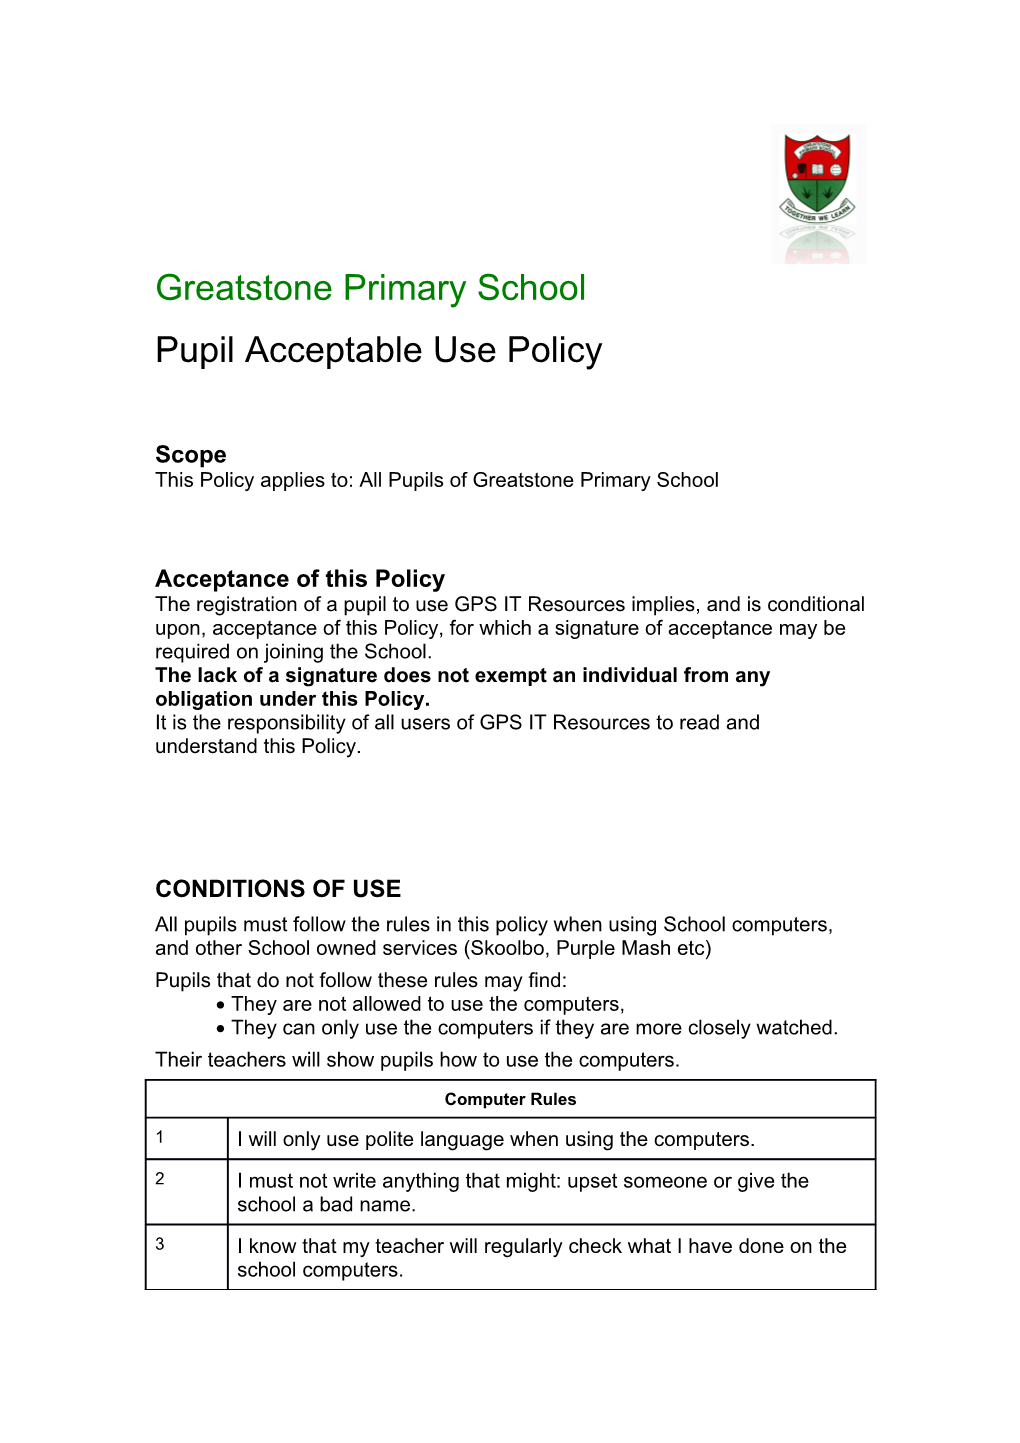 Pupil Acceptable Use Policy